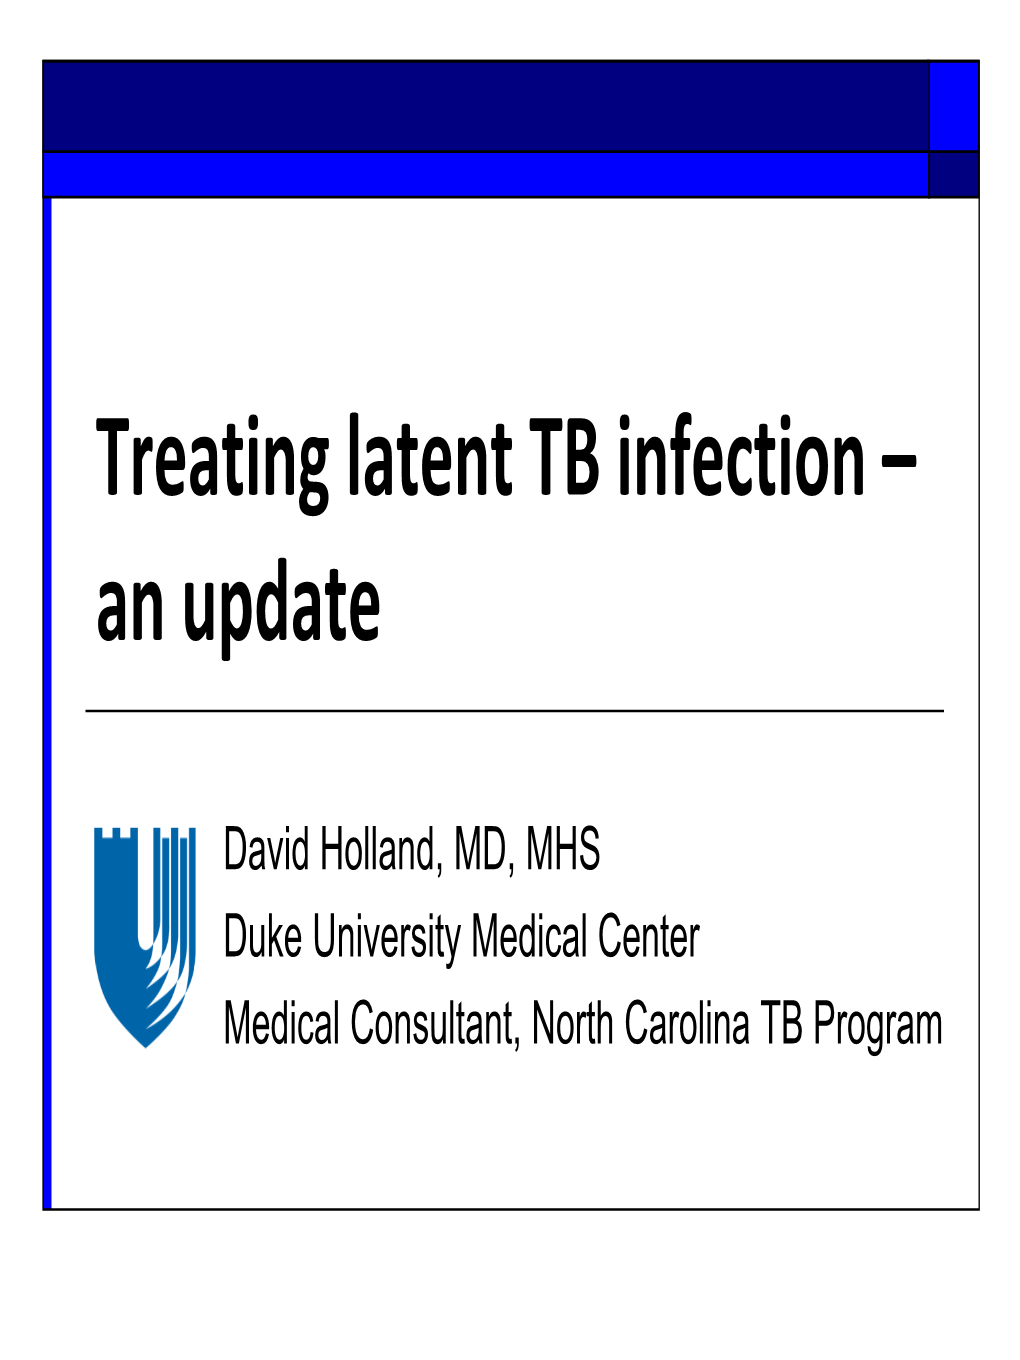 Treating Latent TB Infection – an Update